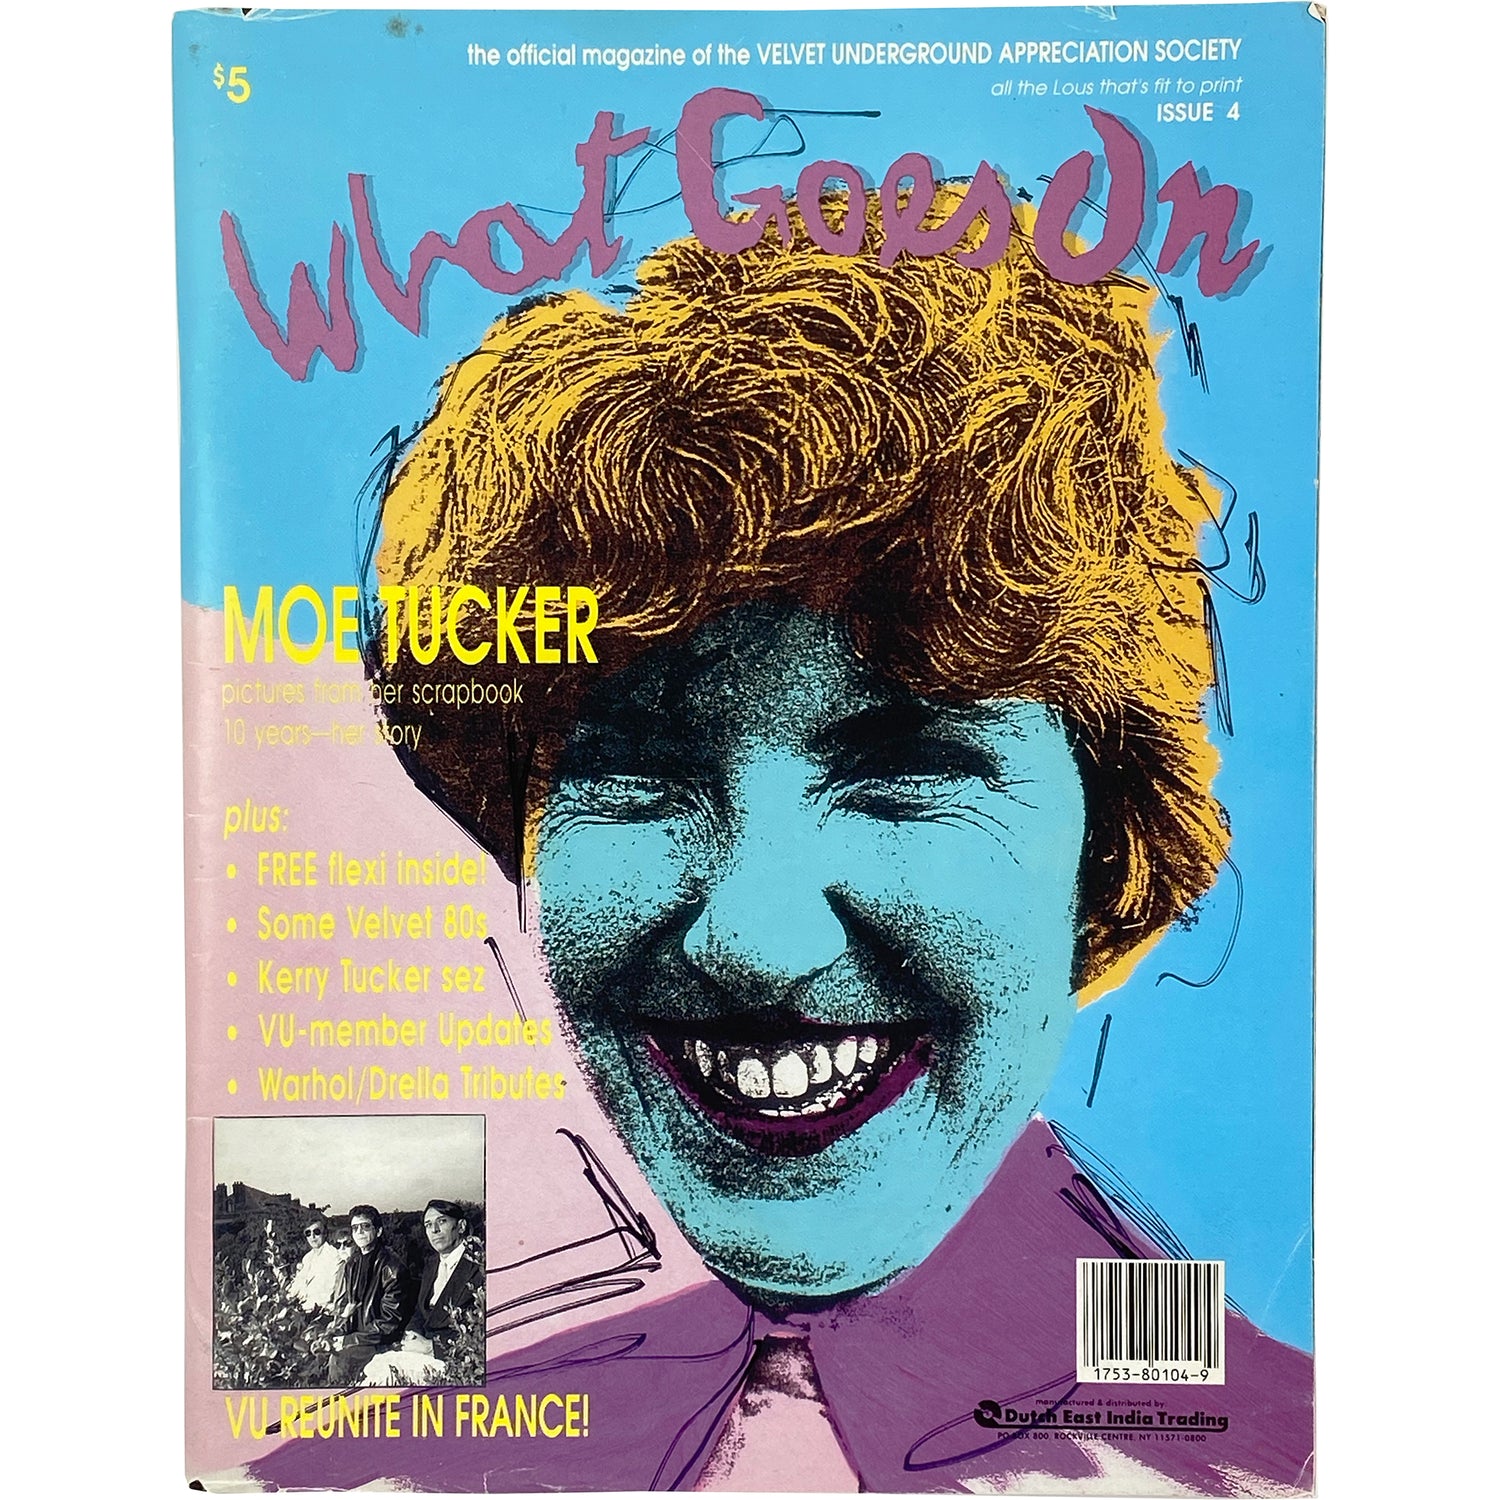 WHAT GOES ON MAGAZINE - ISSUE 4